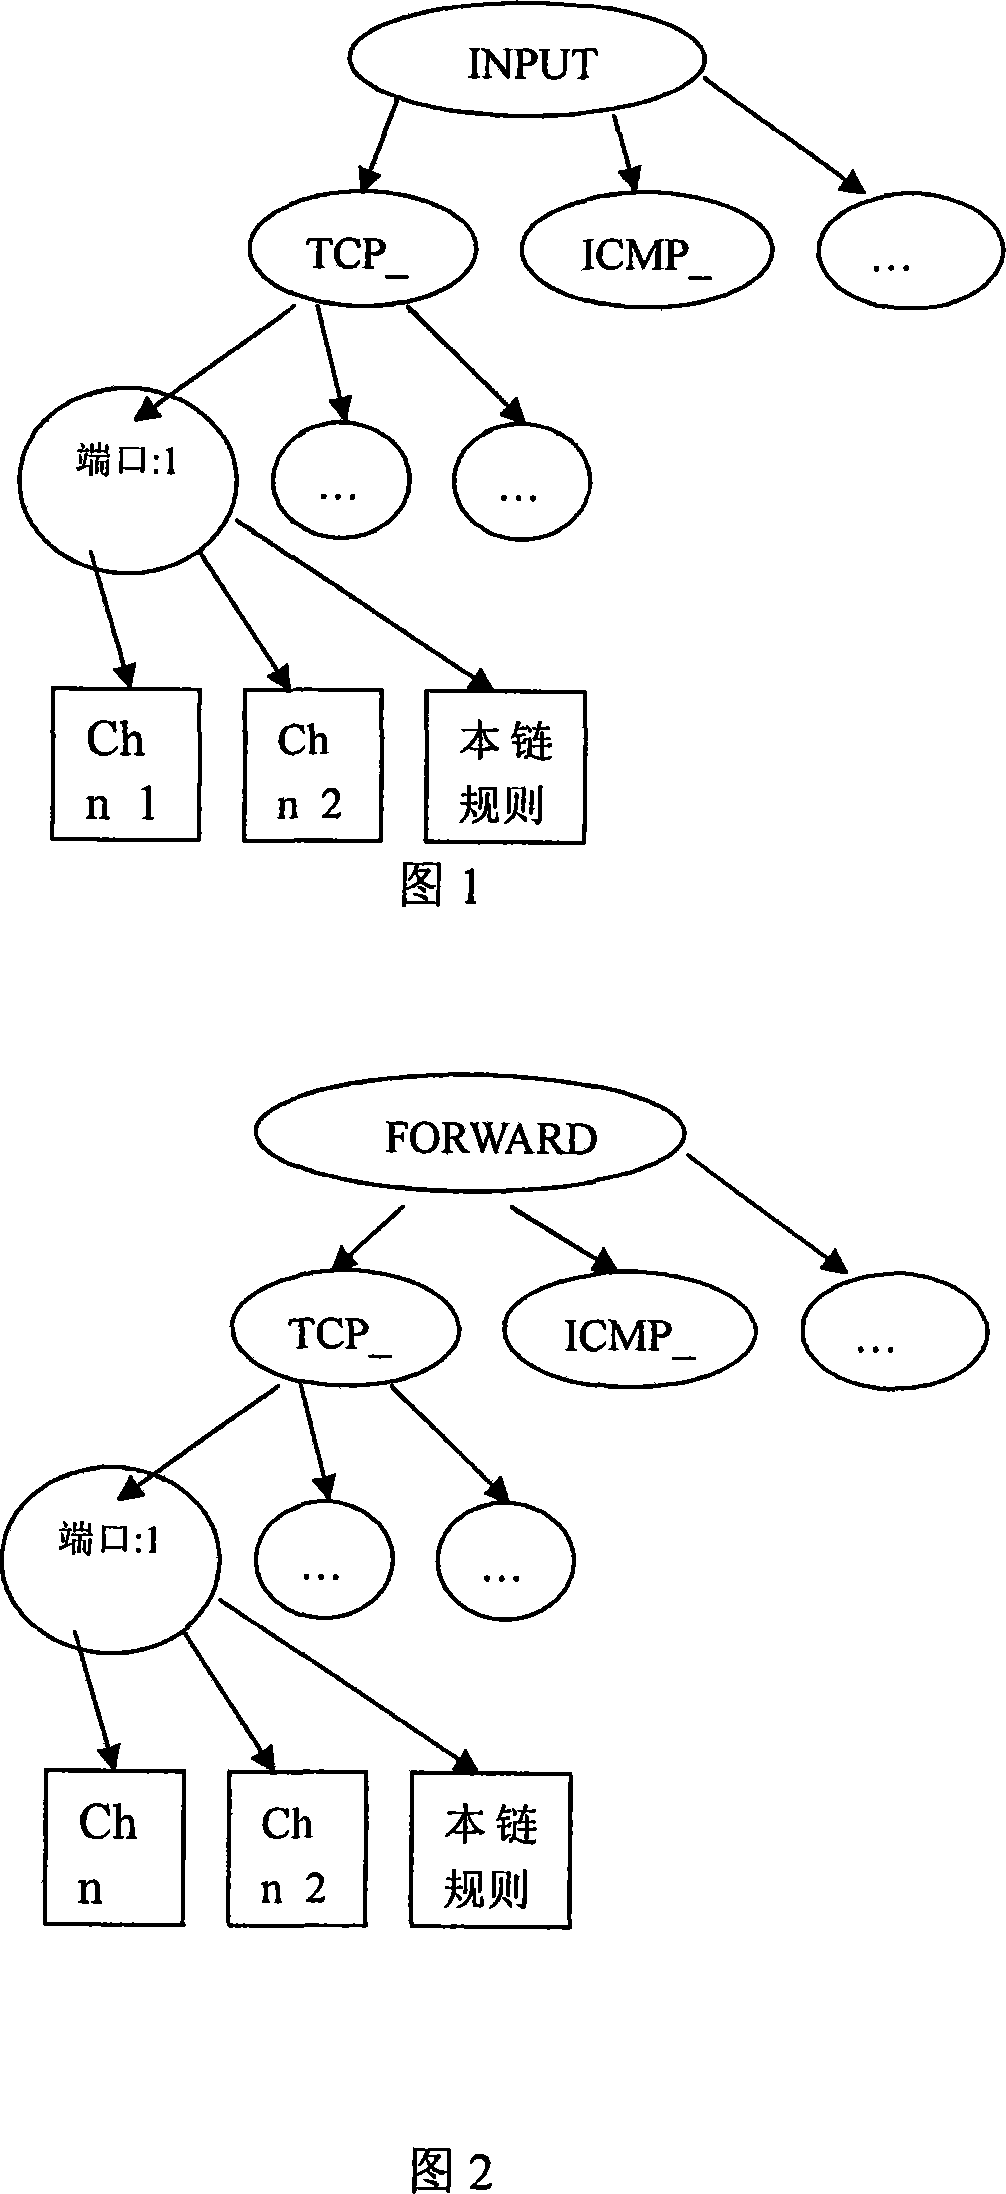 An efficient filtering method for multi-language network data packets